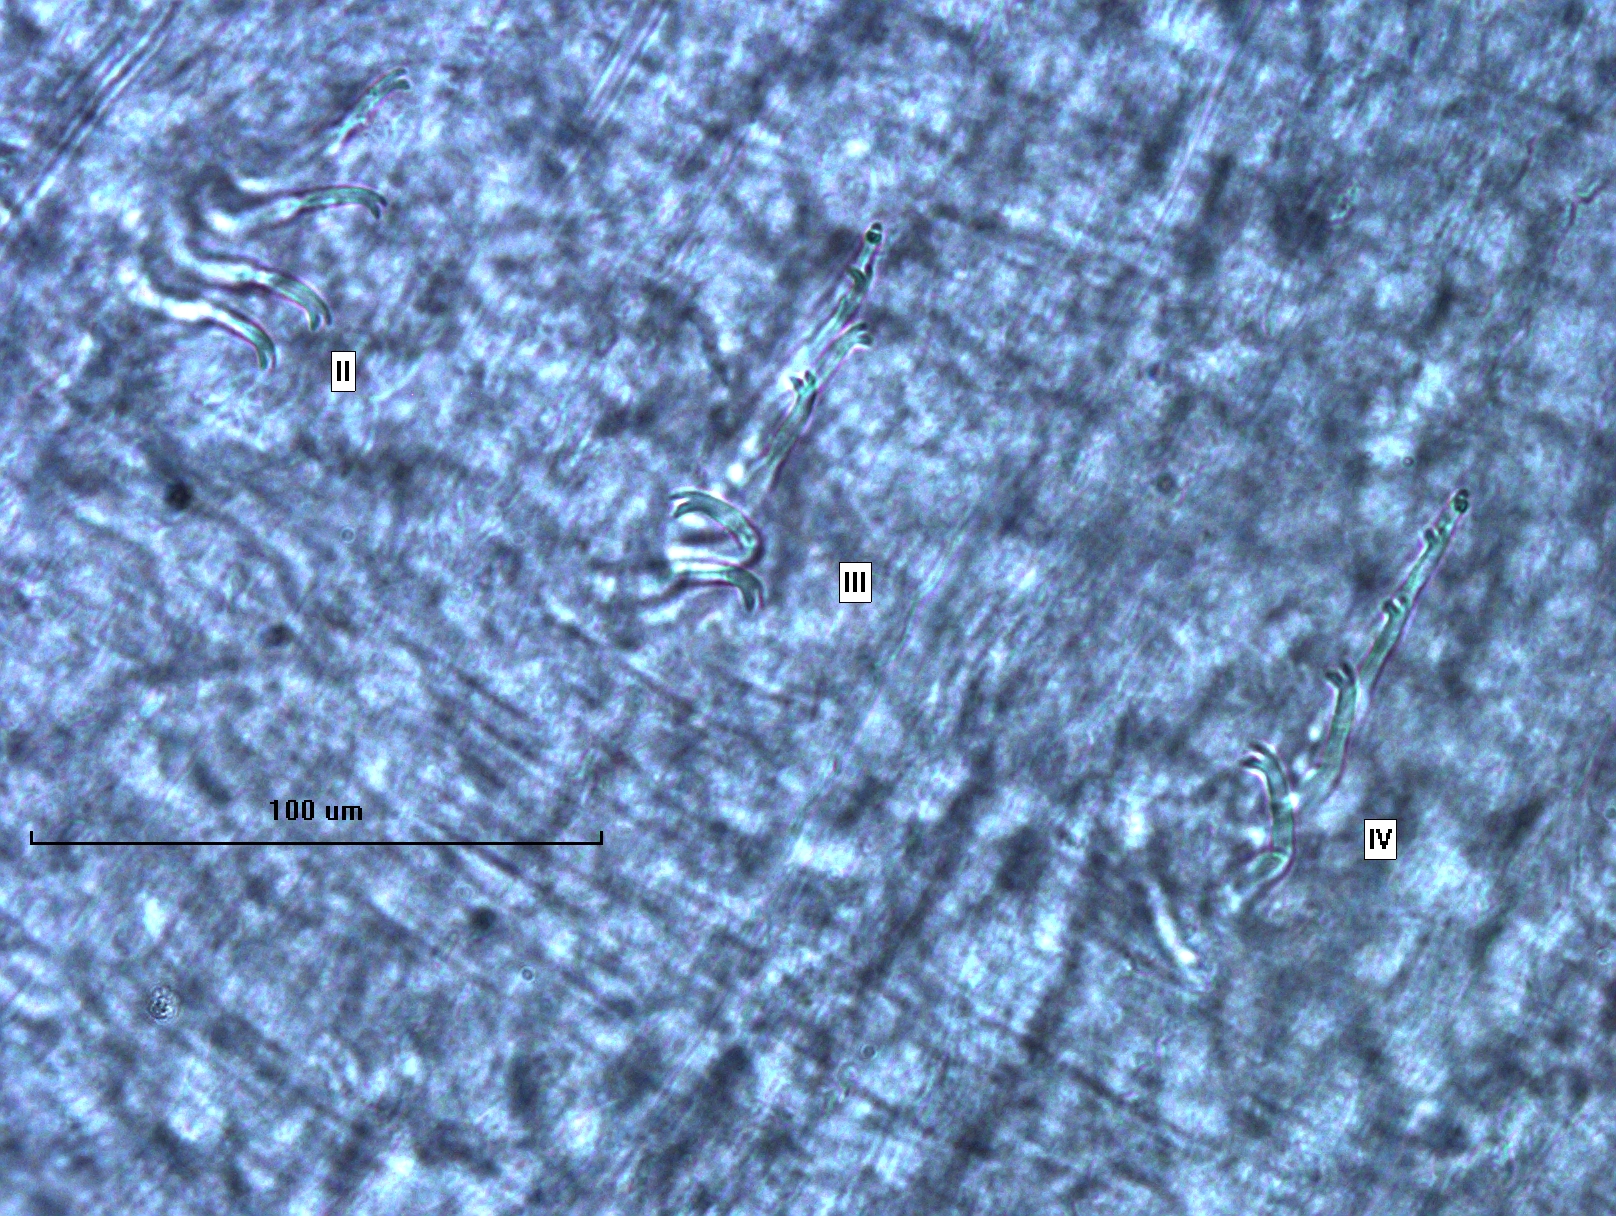 photomicrograph of the chaetae of a worm, which are bifid with the upper tooth shorter and thinner than the lower tooth. Bundles are labeled II, III, and IV.